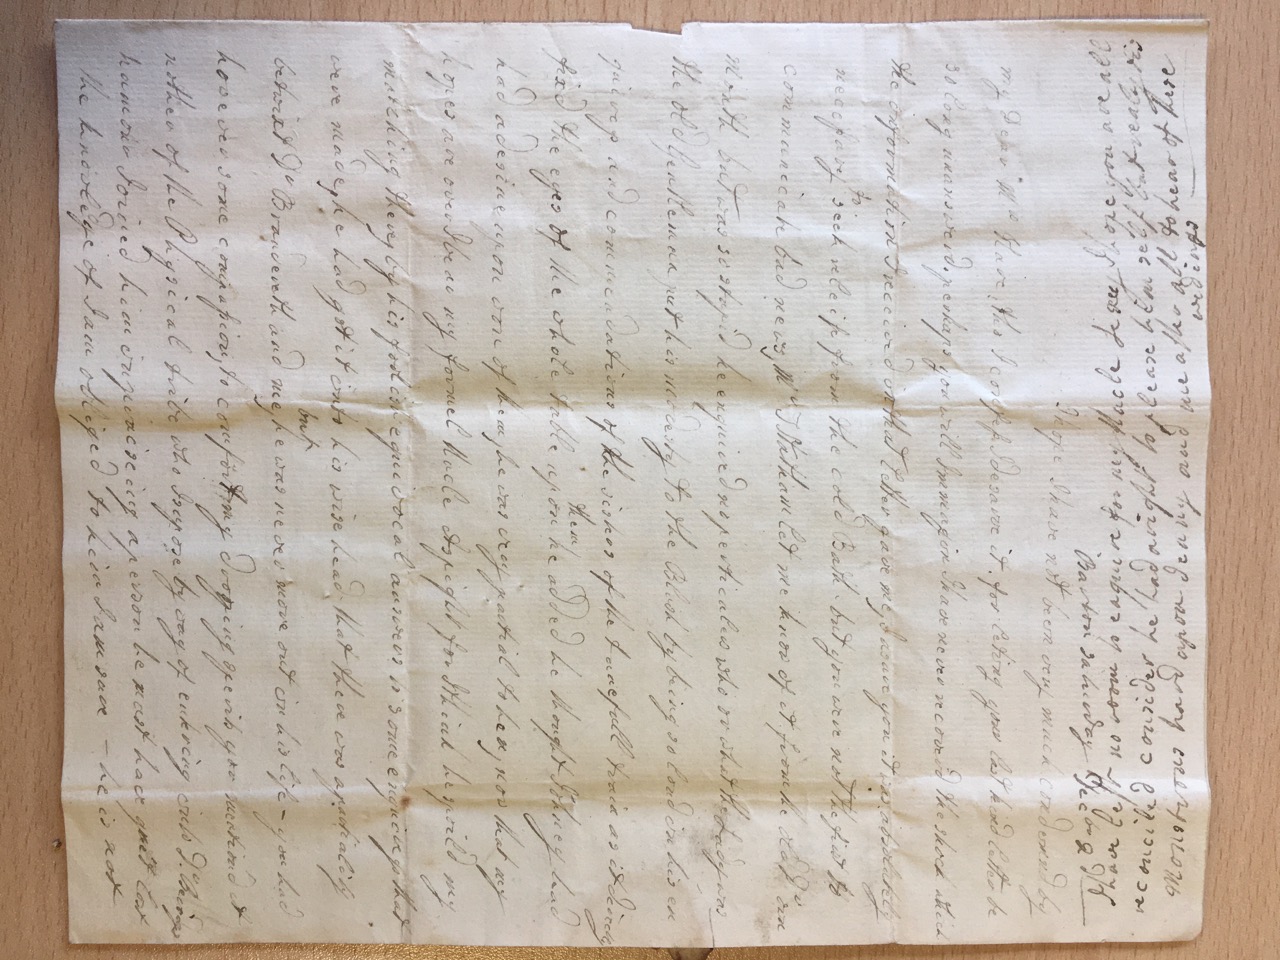 Image #1 of letter: Mary Ann Hesketh to Ann Hare, 2 December